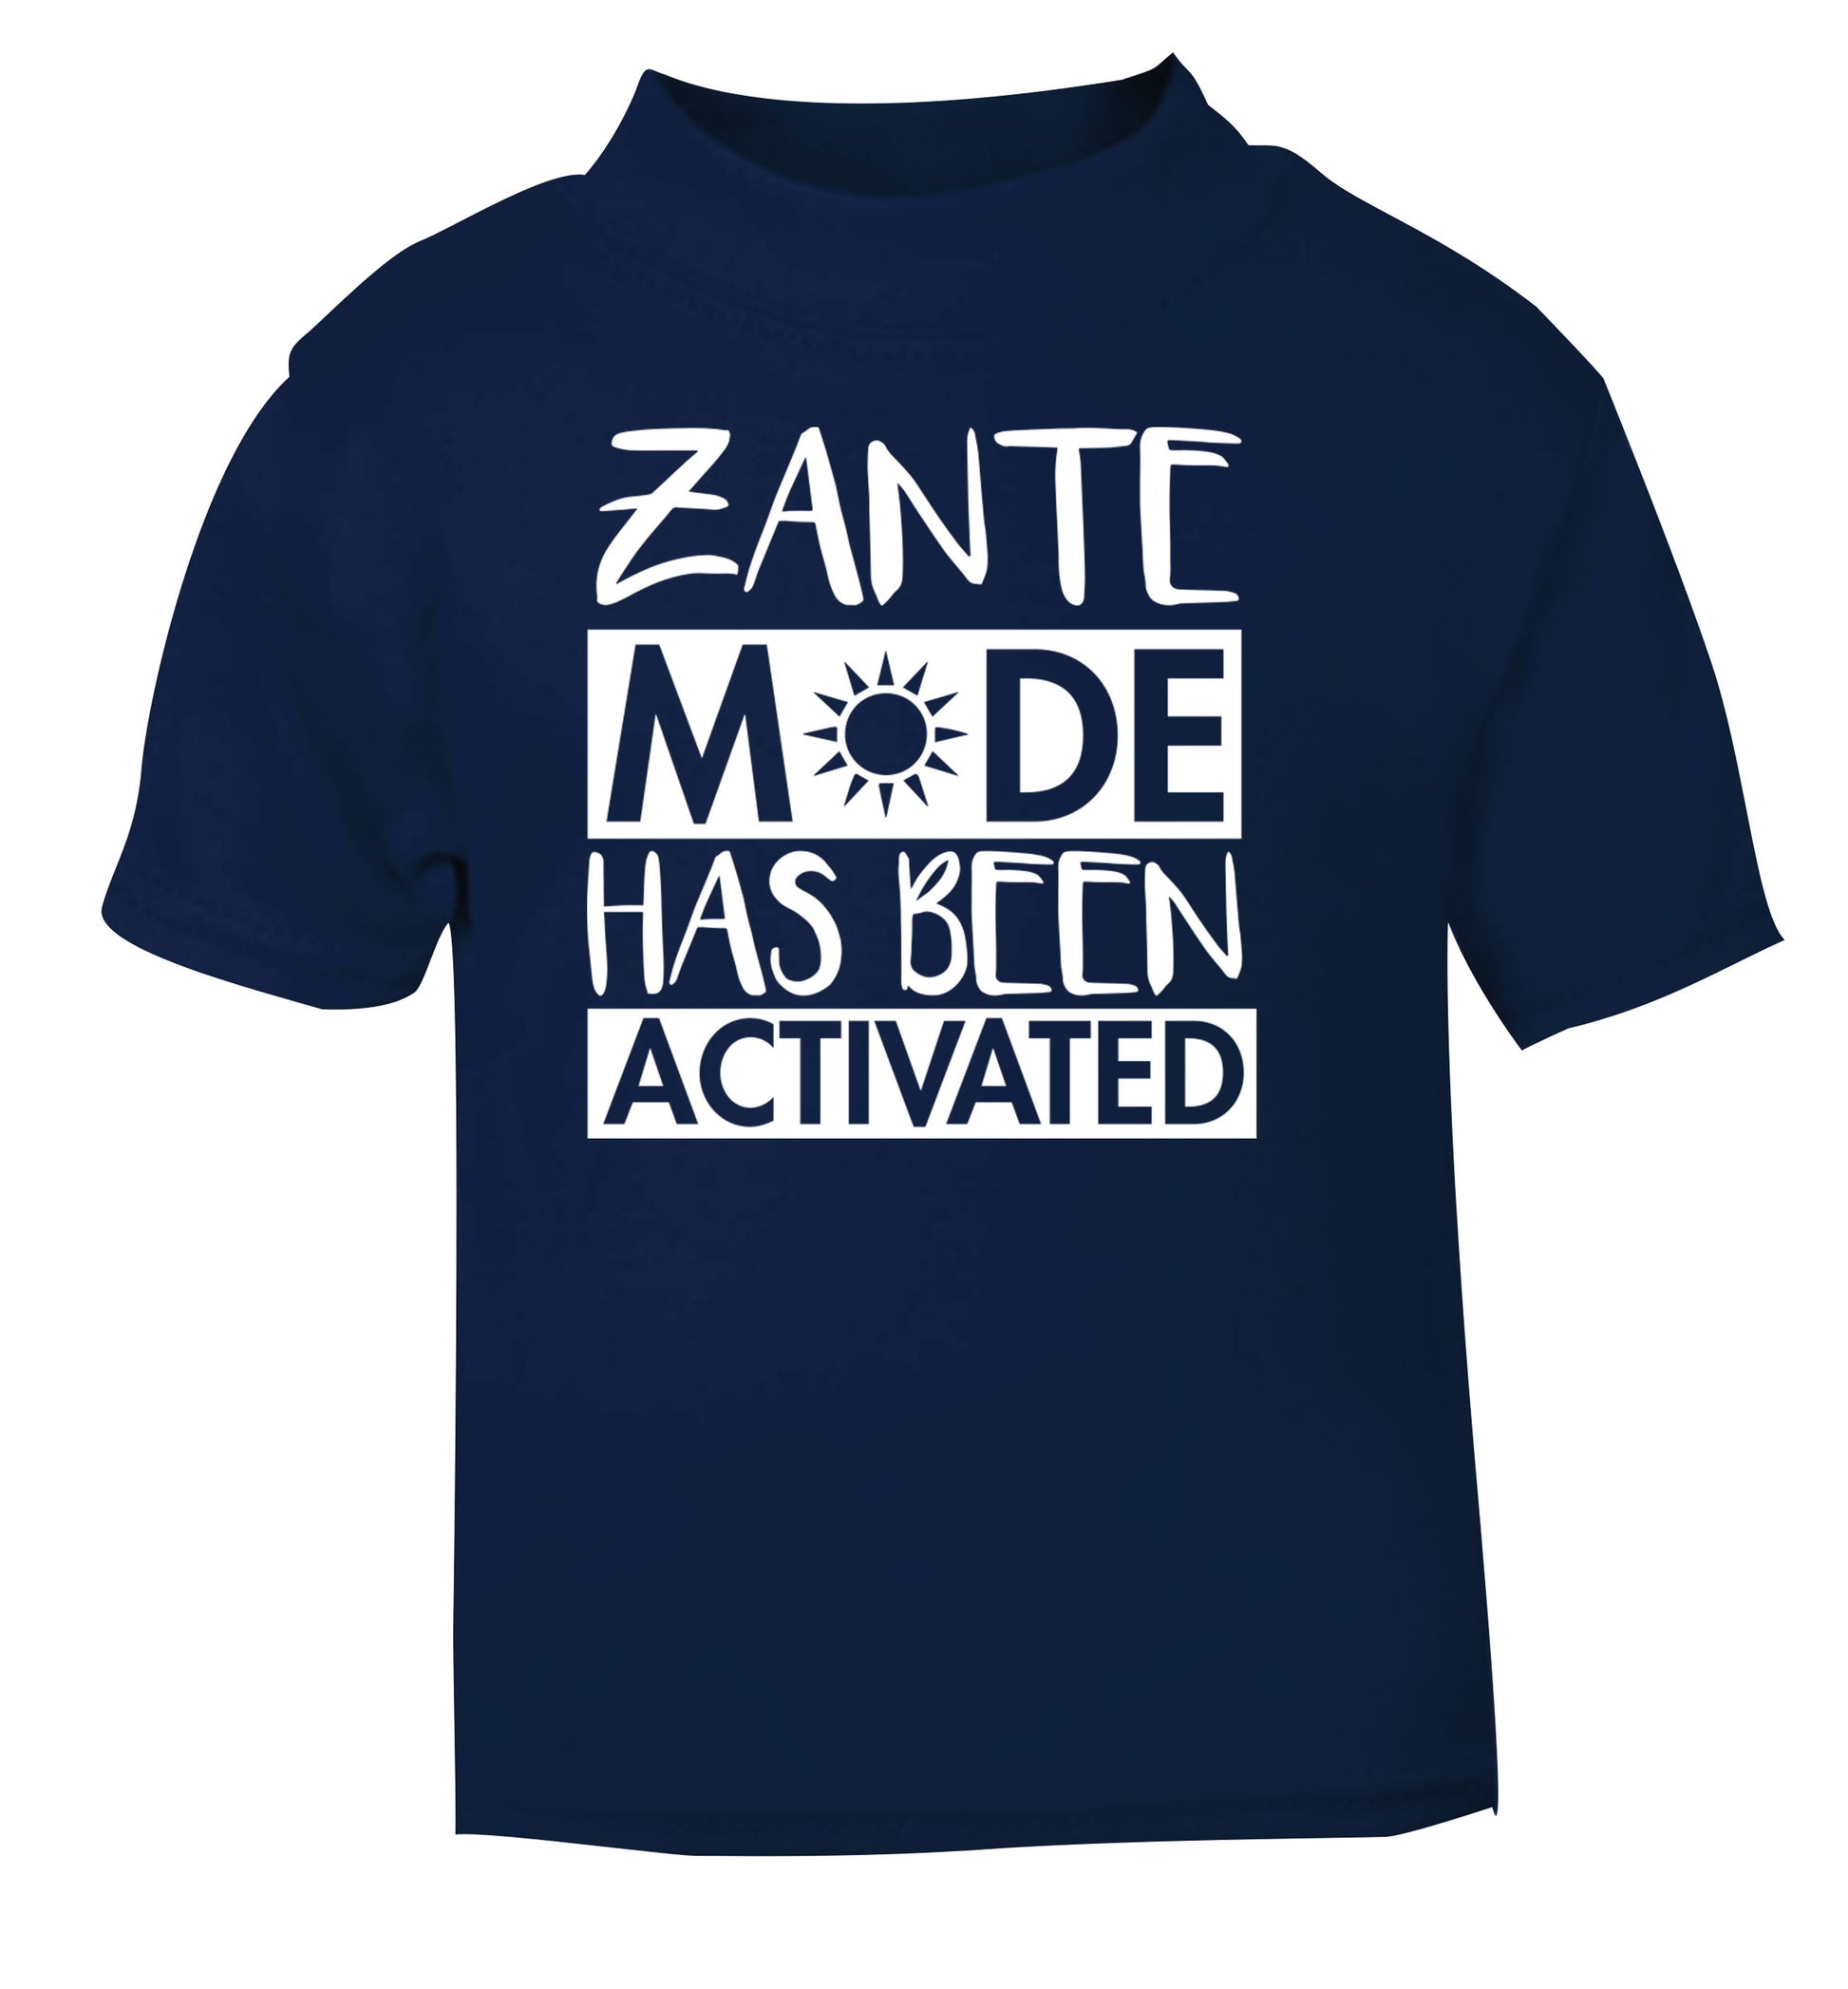 Zante mode has been activated navy Baby Toddler Tshirt 2 Years